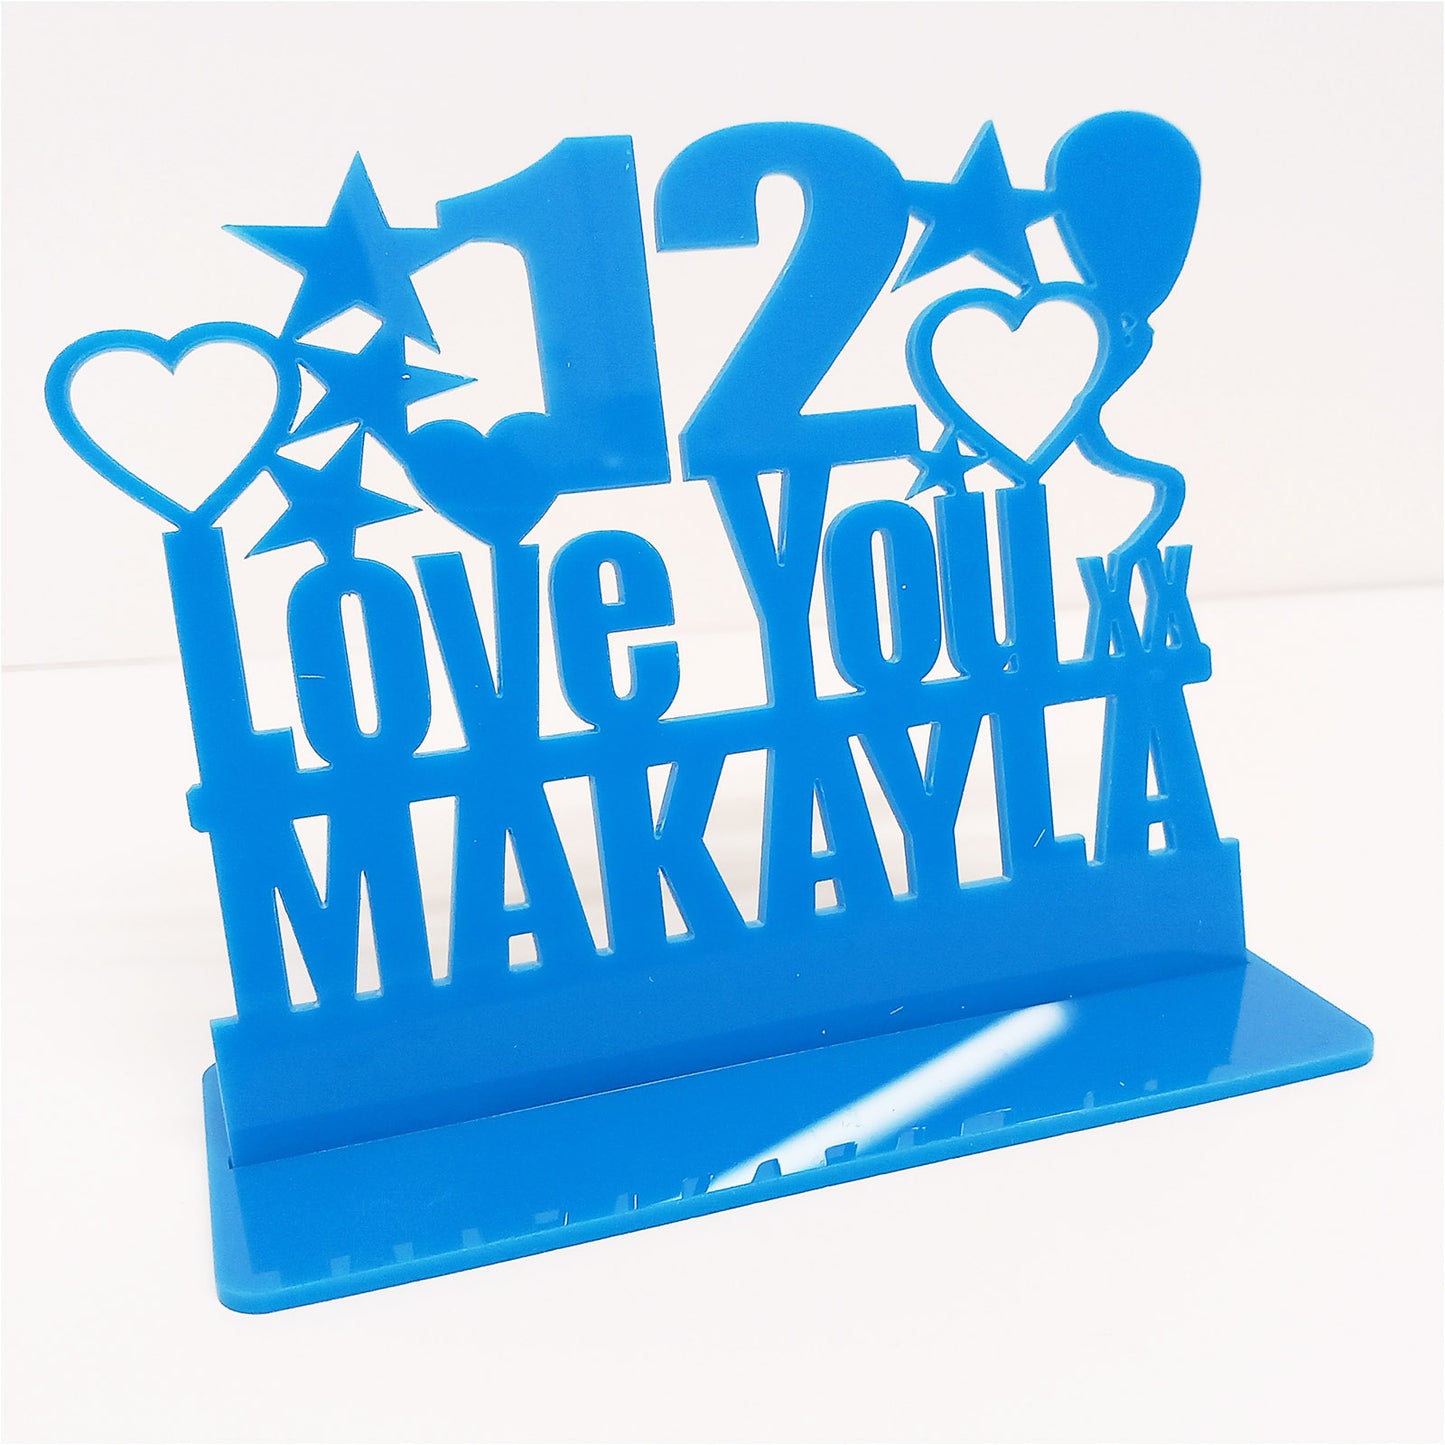 Personalised 12th birthday gift featuring the Love You birthday design theme. This present is an acrylic keepsake ornamental plaque.